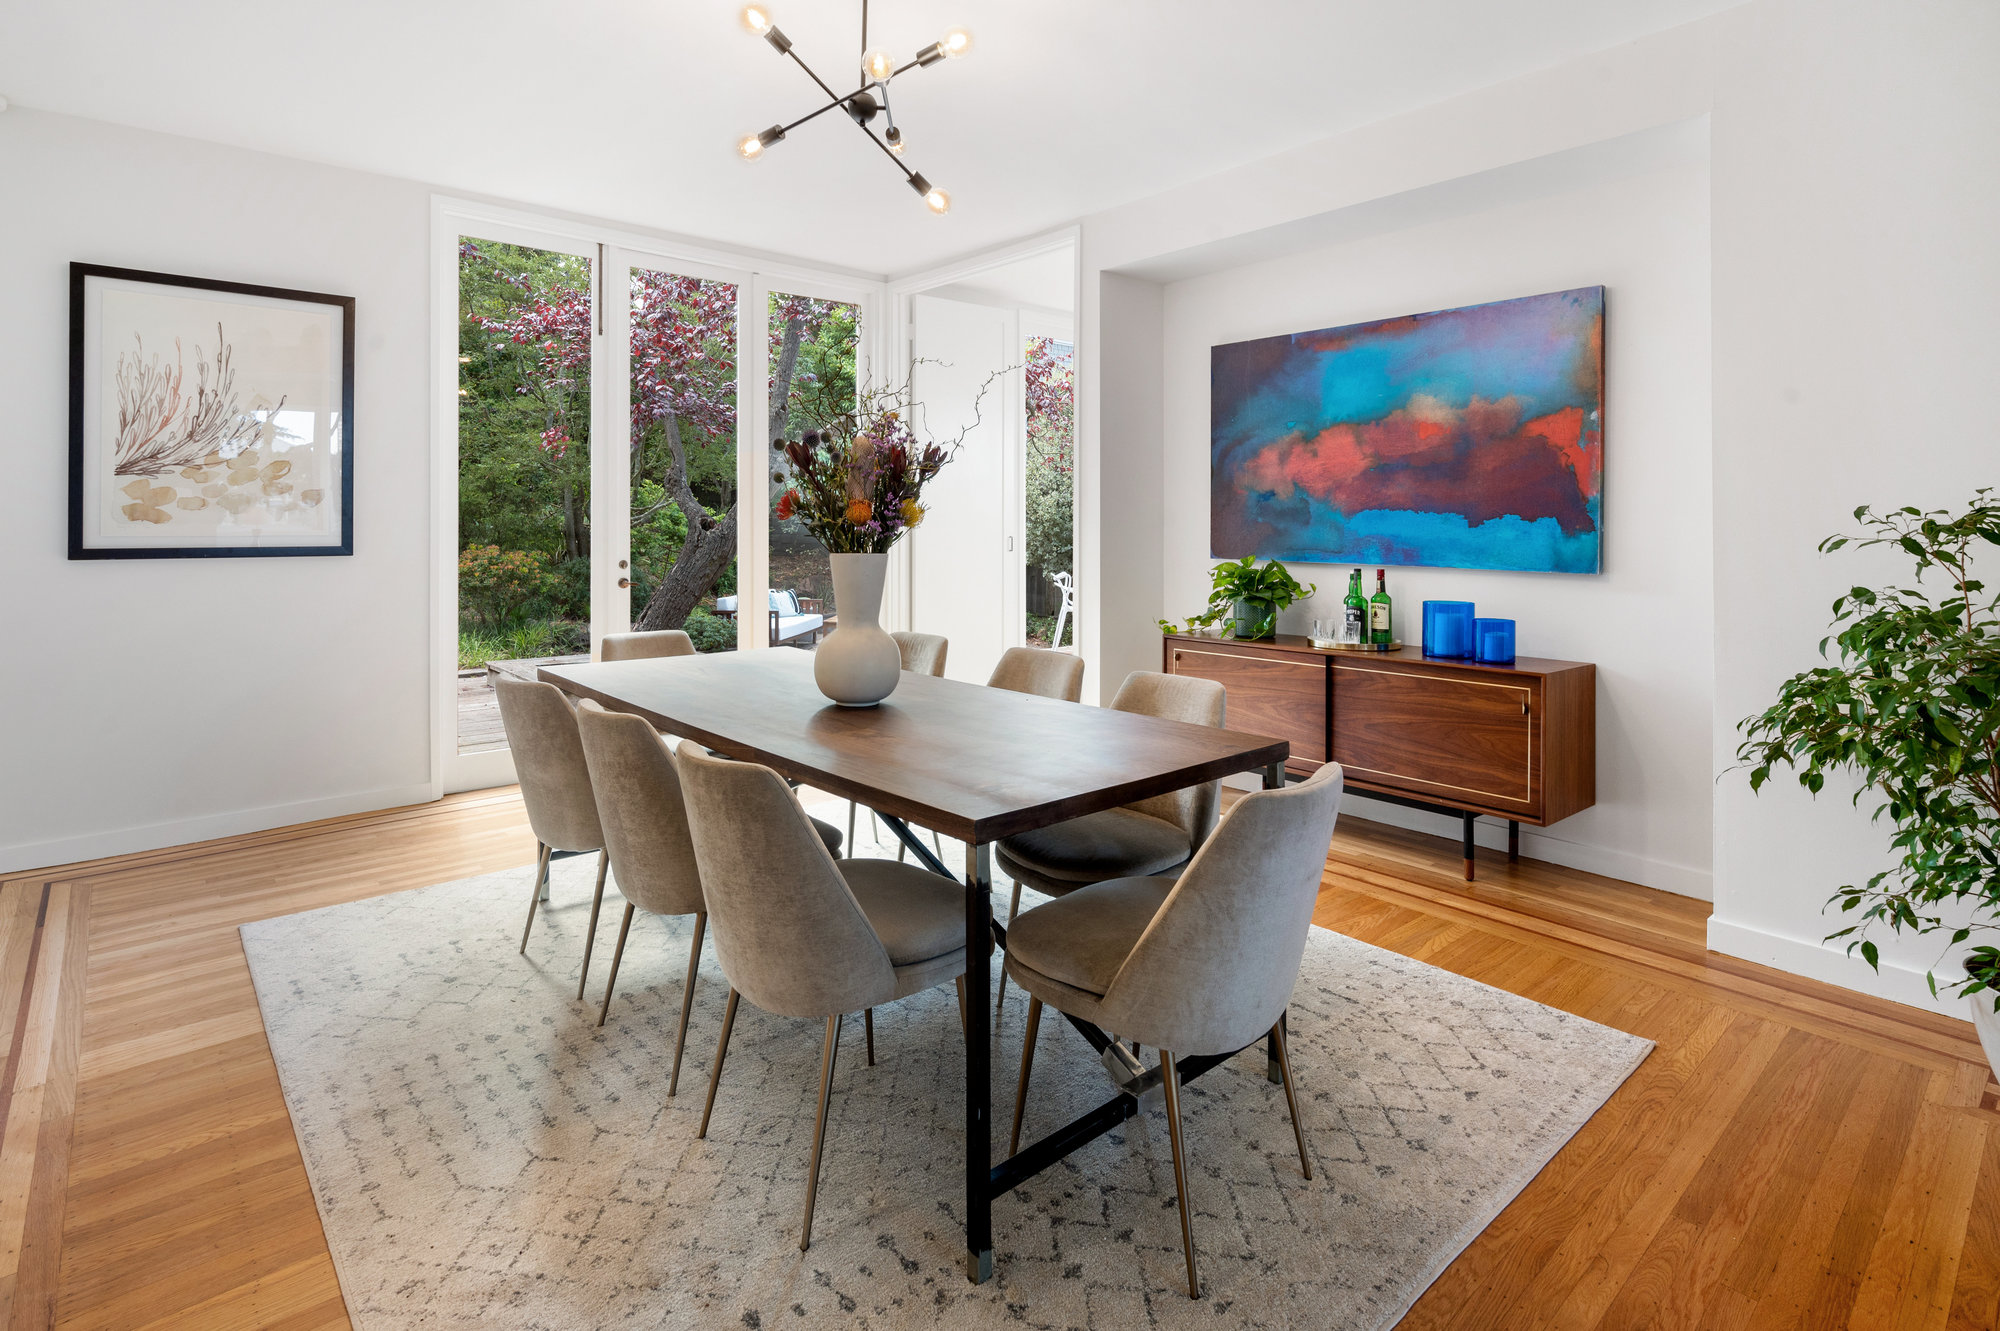 Property Photo: Dining room with wood floors and floor to ceiling windows